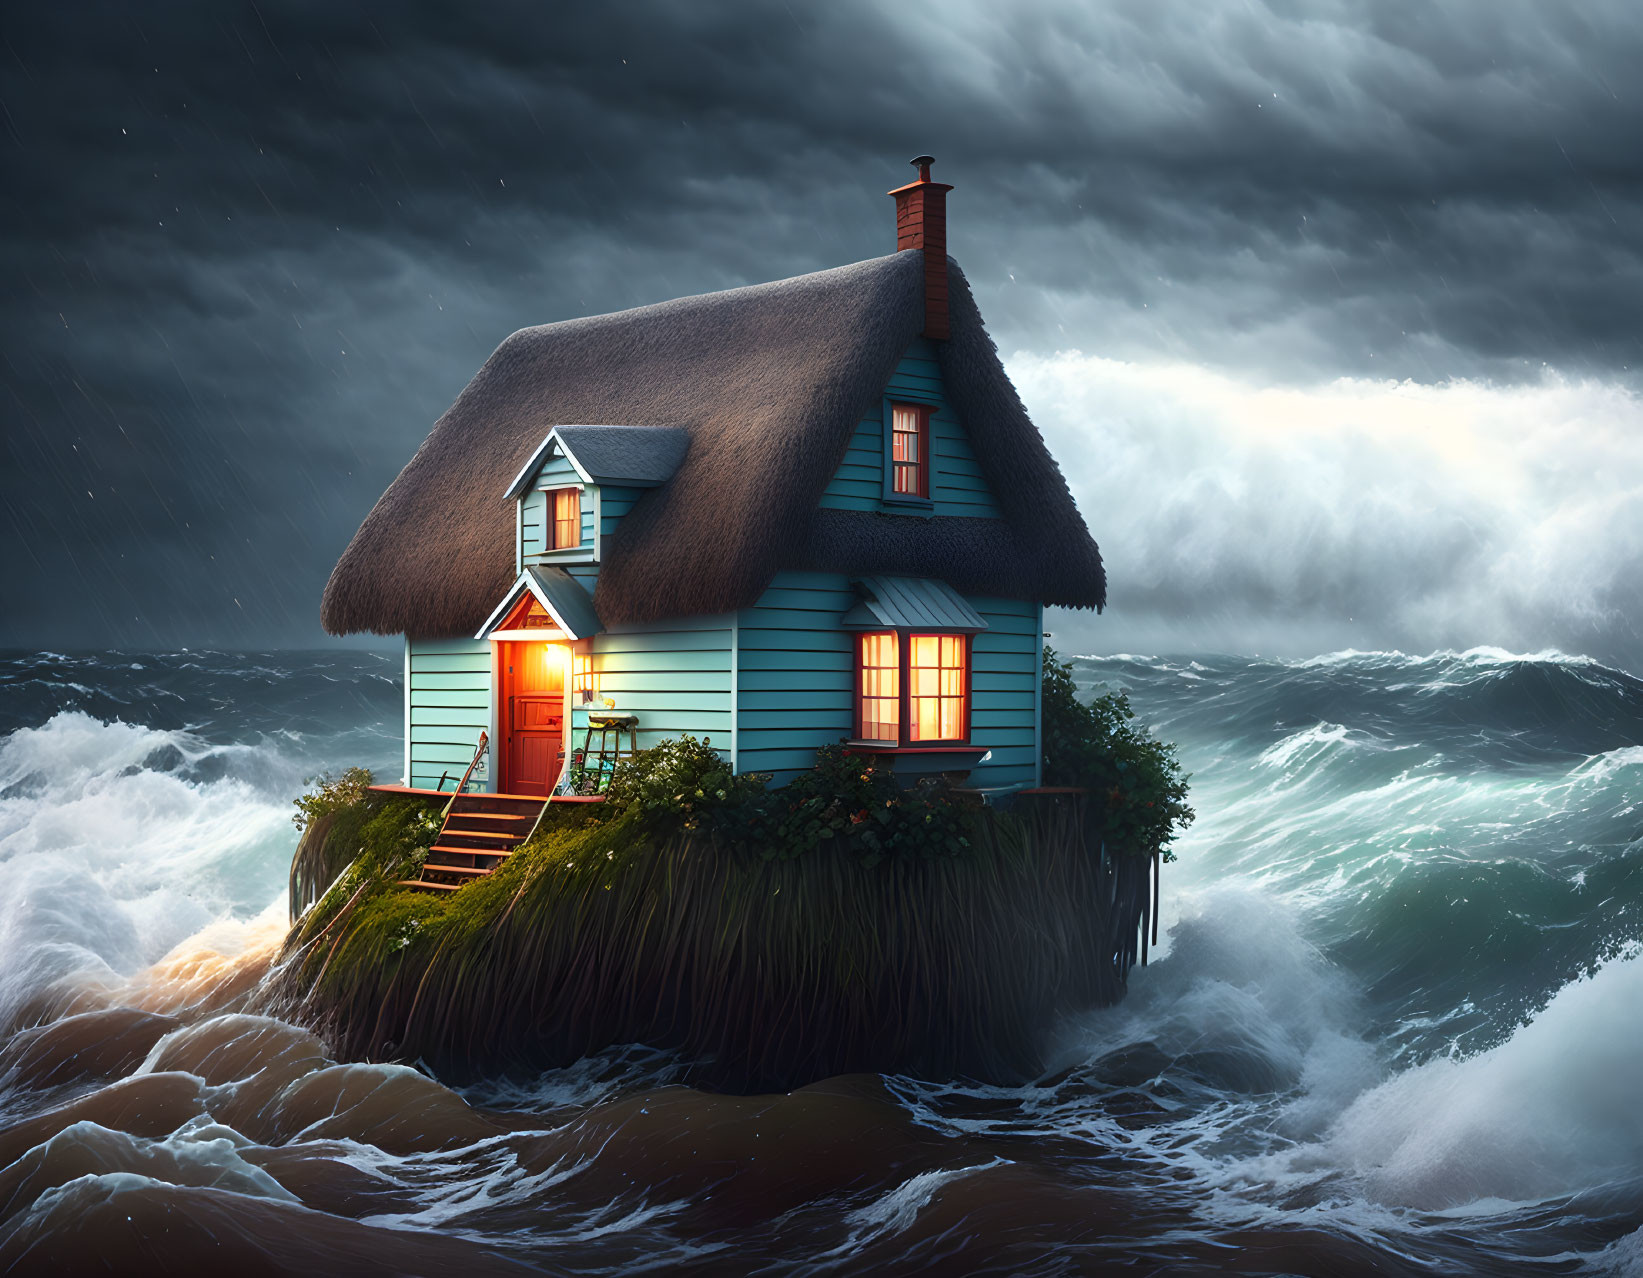   a little cottage floats in Storm sea